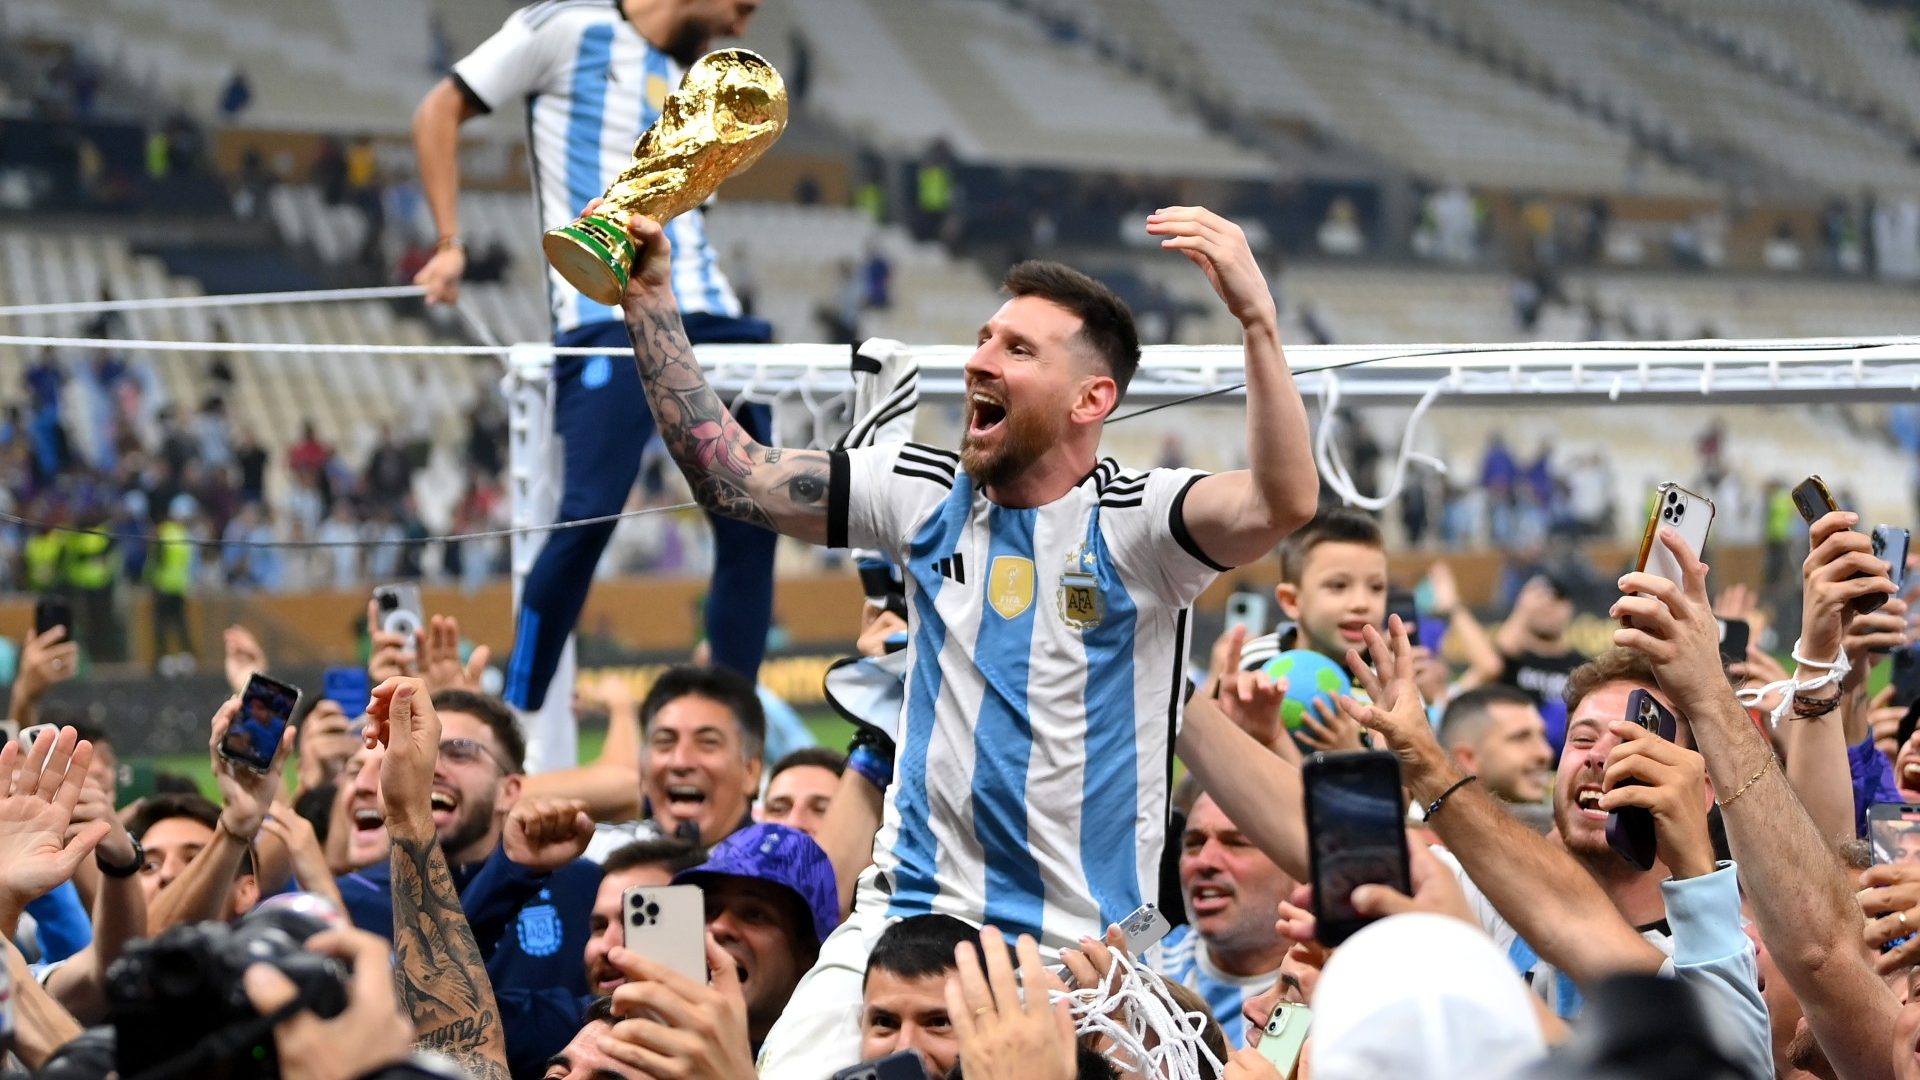 Messi is carried on his shoulders with the world cup in his hands after Argentina's victory against France in the World Cup in Qatar.  (Photo: Dan Mullan/Getty Images)